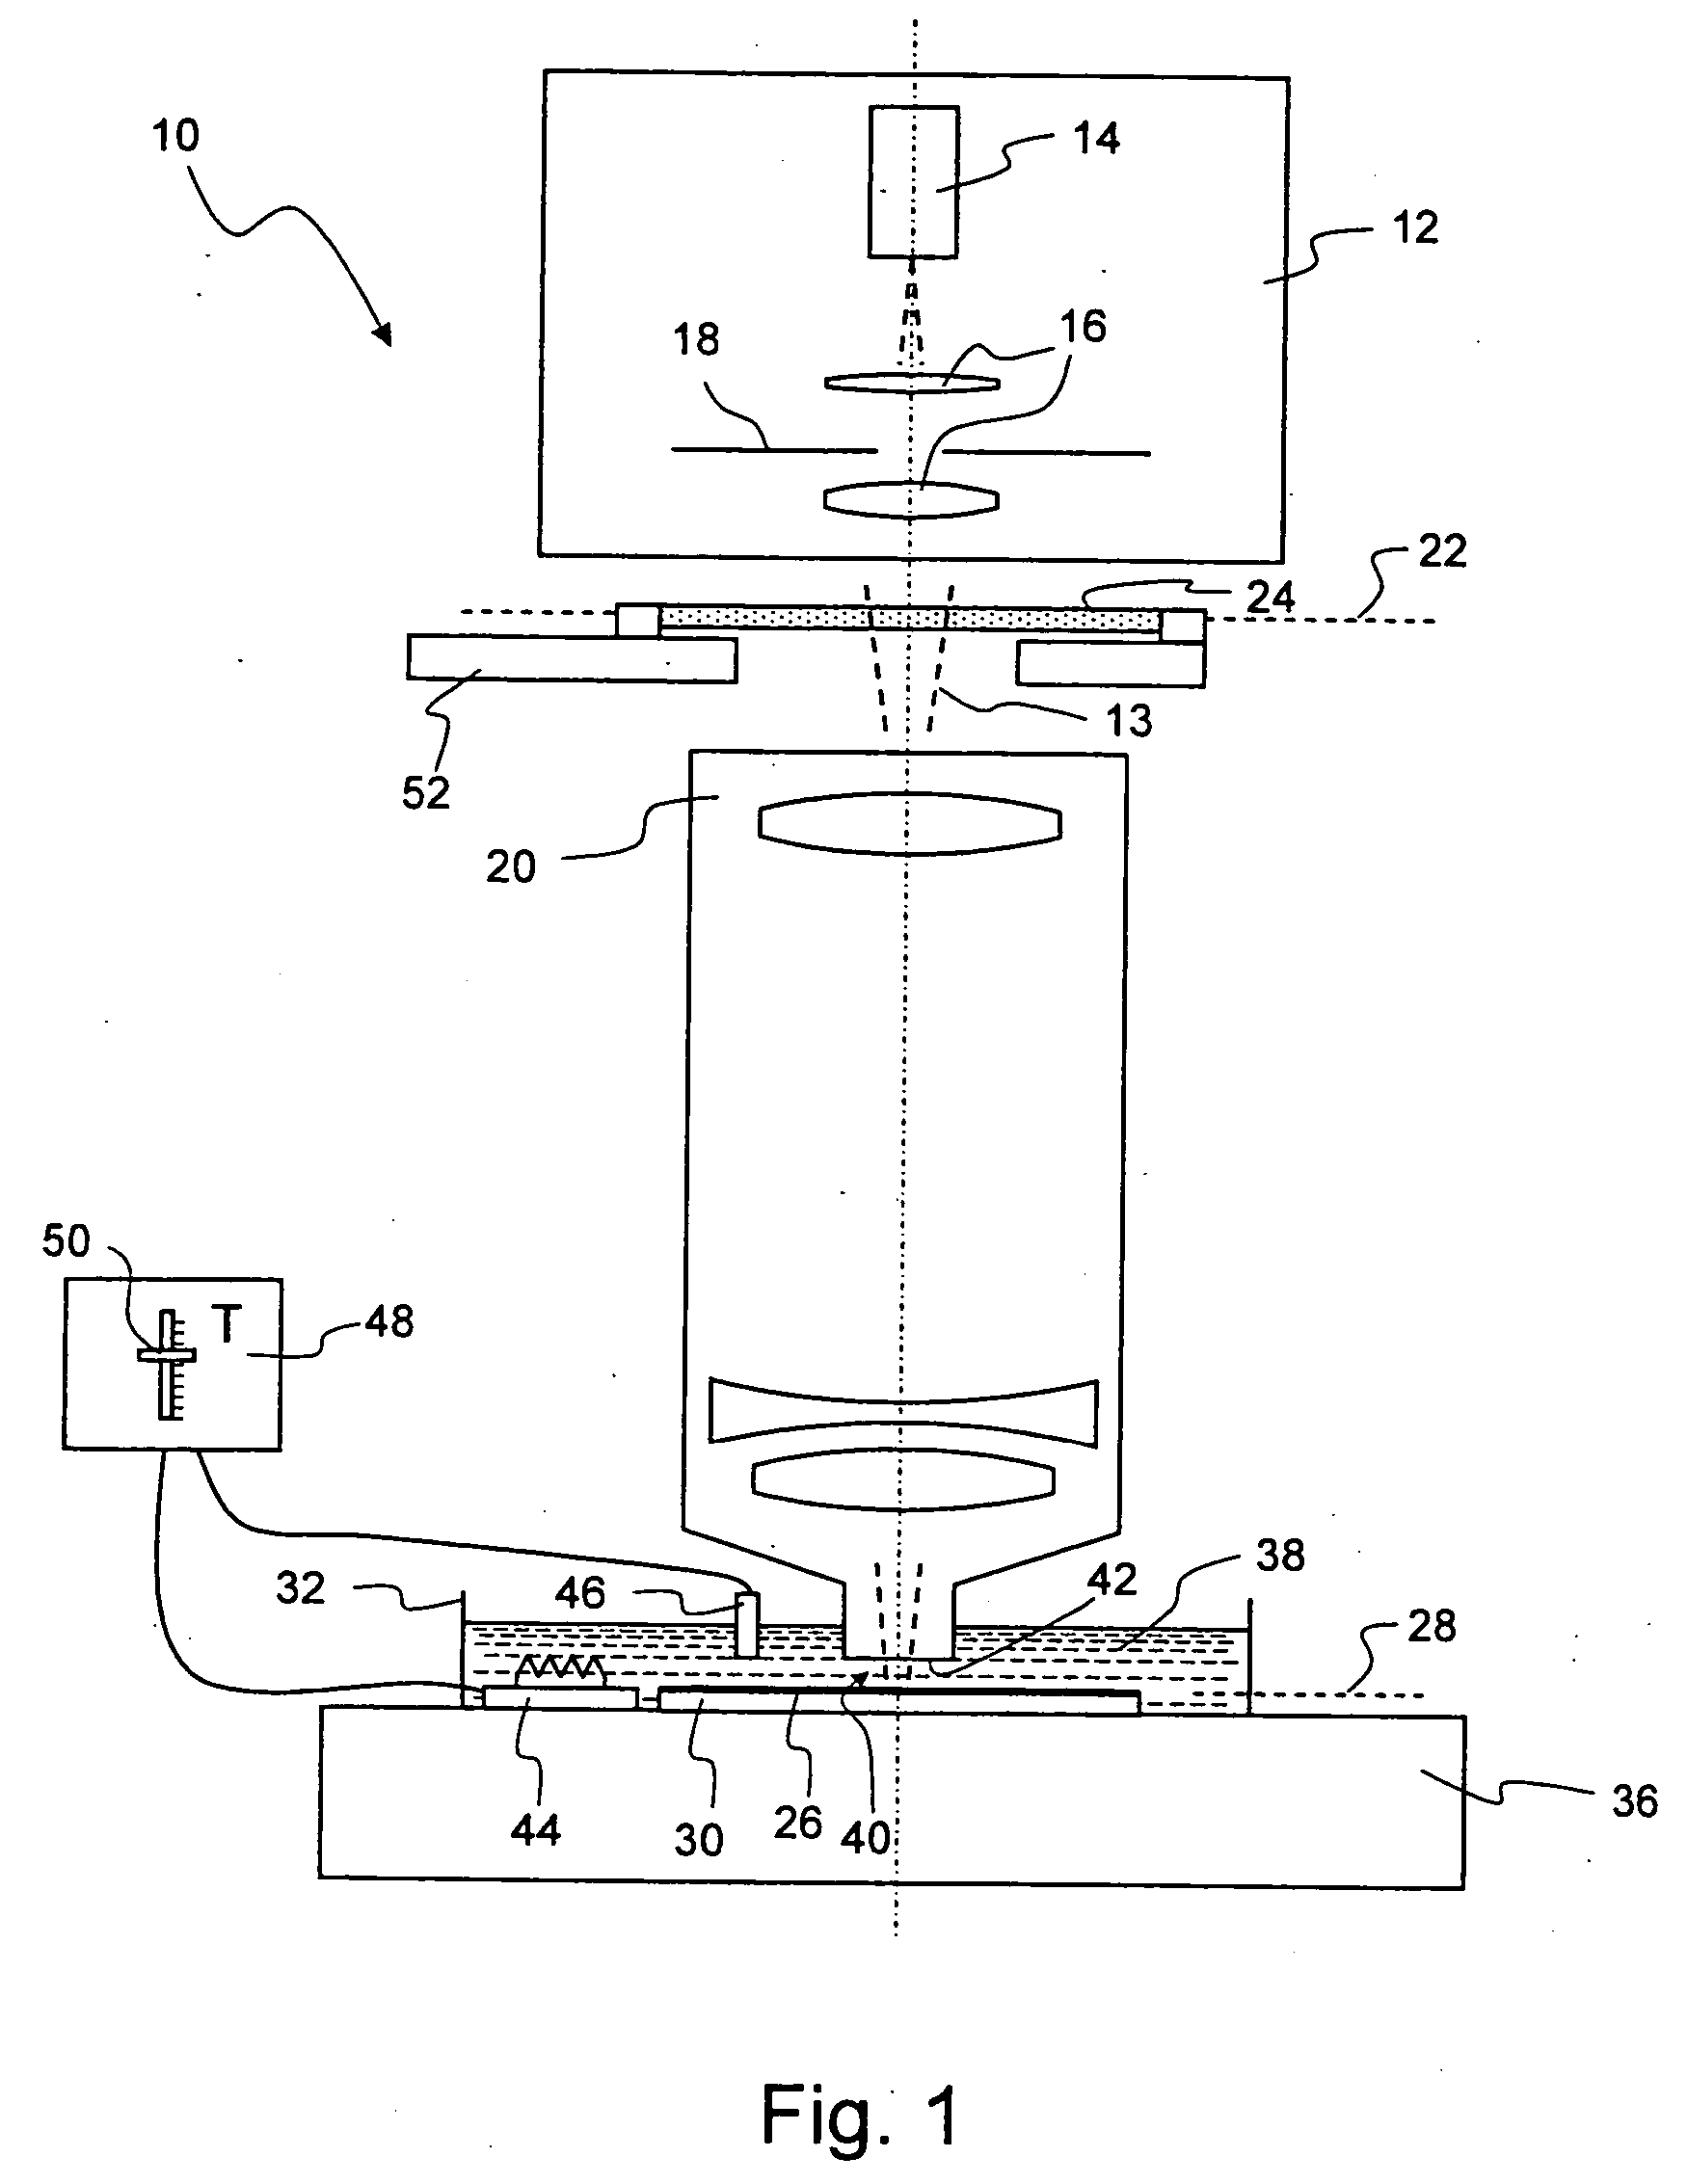 Method for improving an optical imaging property of a projection objective of a microlithographic projection exposure apparatus